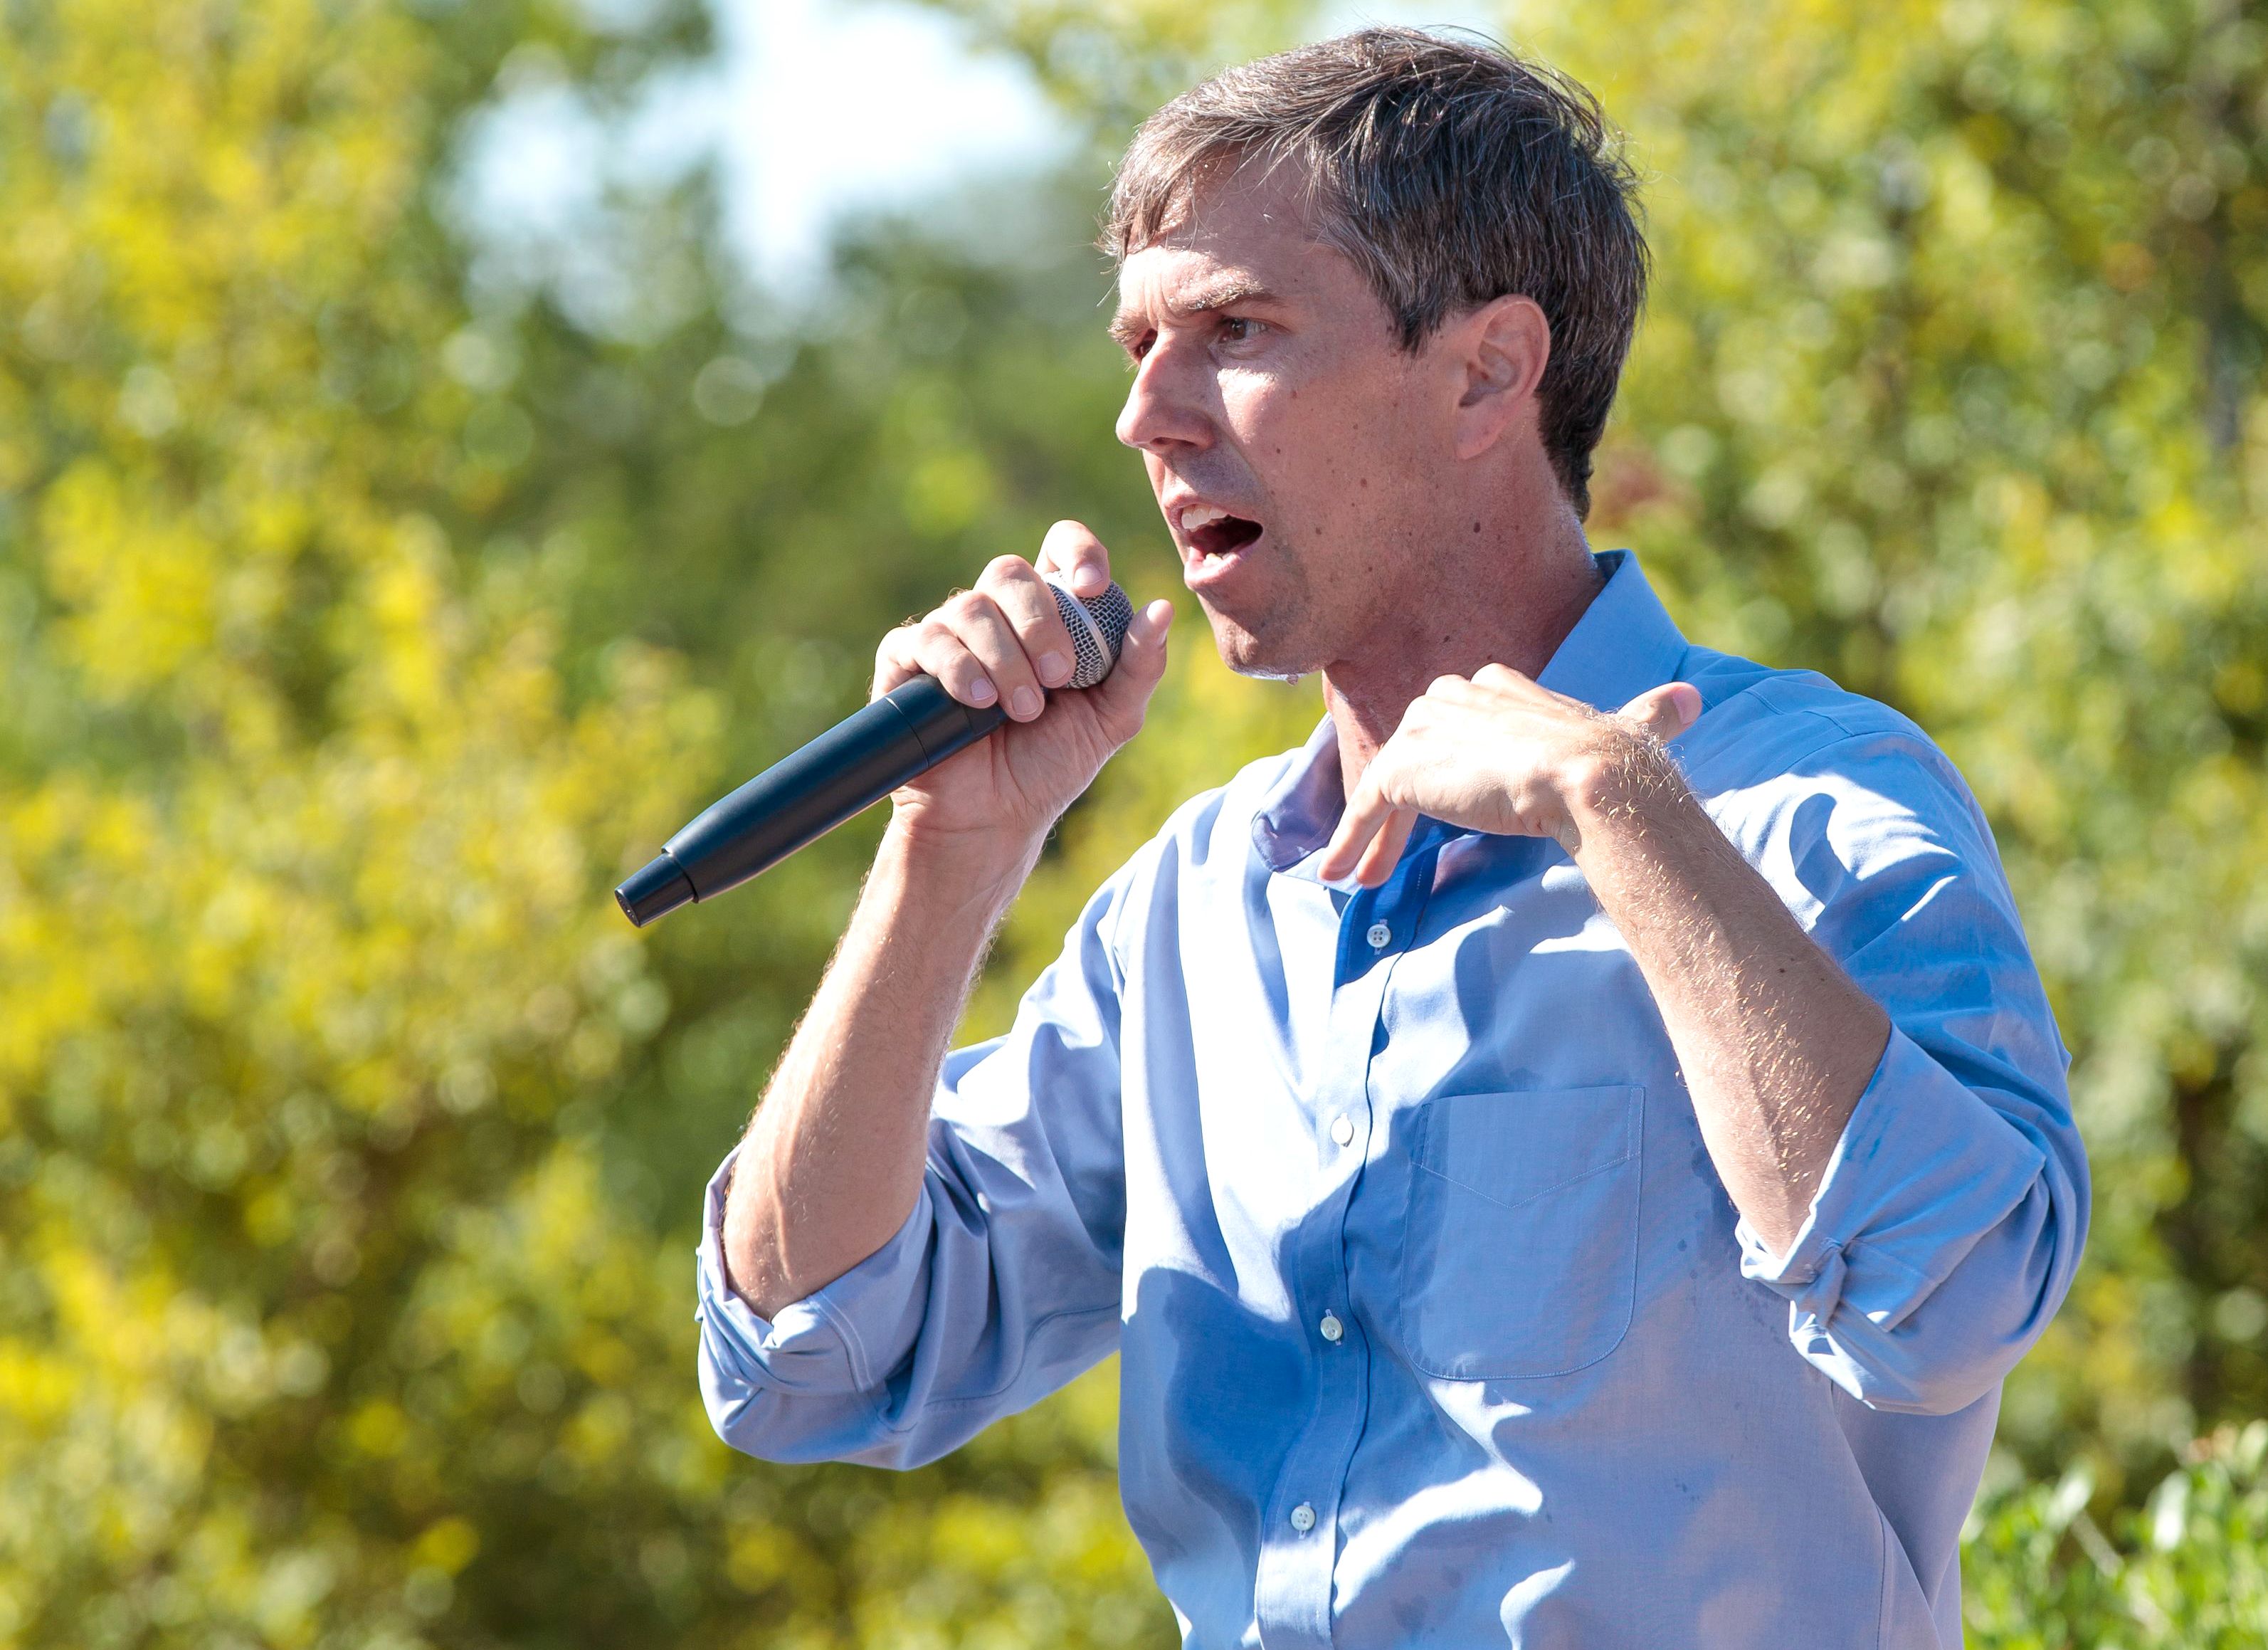 Beto O'Rourke, Texas Democratic Candidate for the U.S. Senate, spoke during a Town Hall event at the Cedar Park Recreation Center
                      Beto O'Rourke Town Hall event in Austin, Texas on Aug. 29, 2018. (Suzanne Cordeiro/REX/Shutterstock)